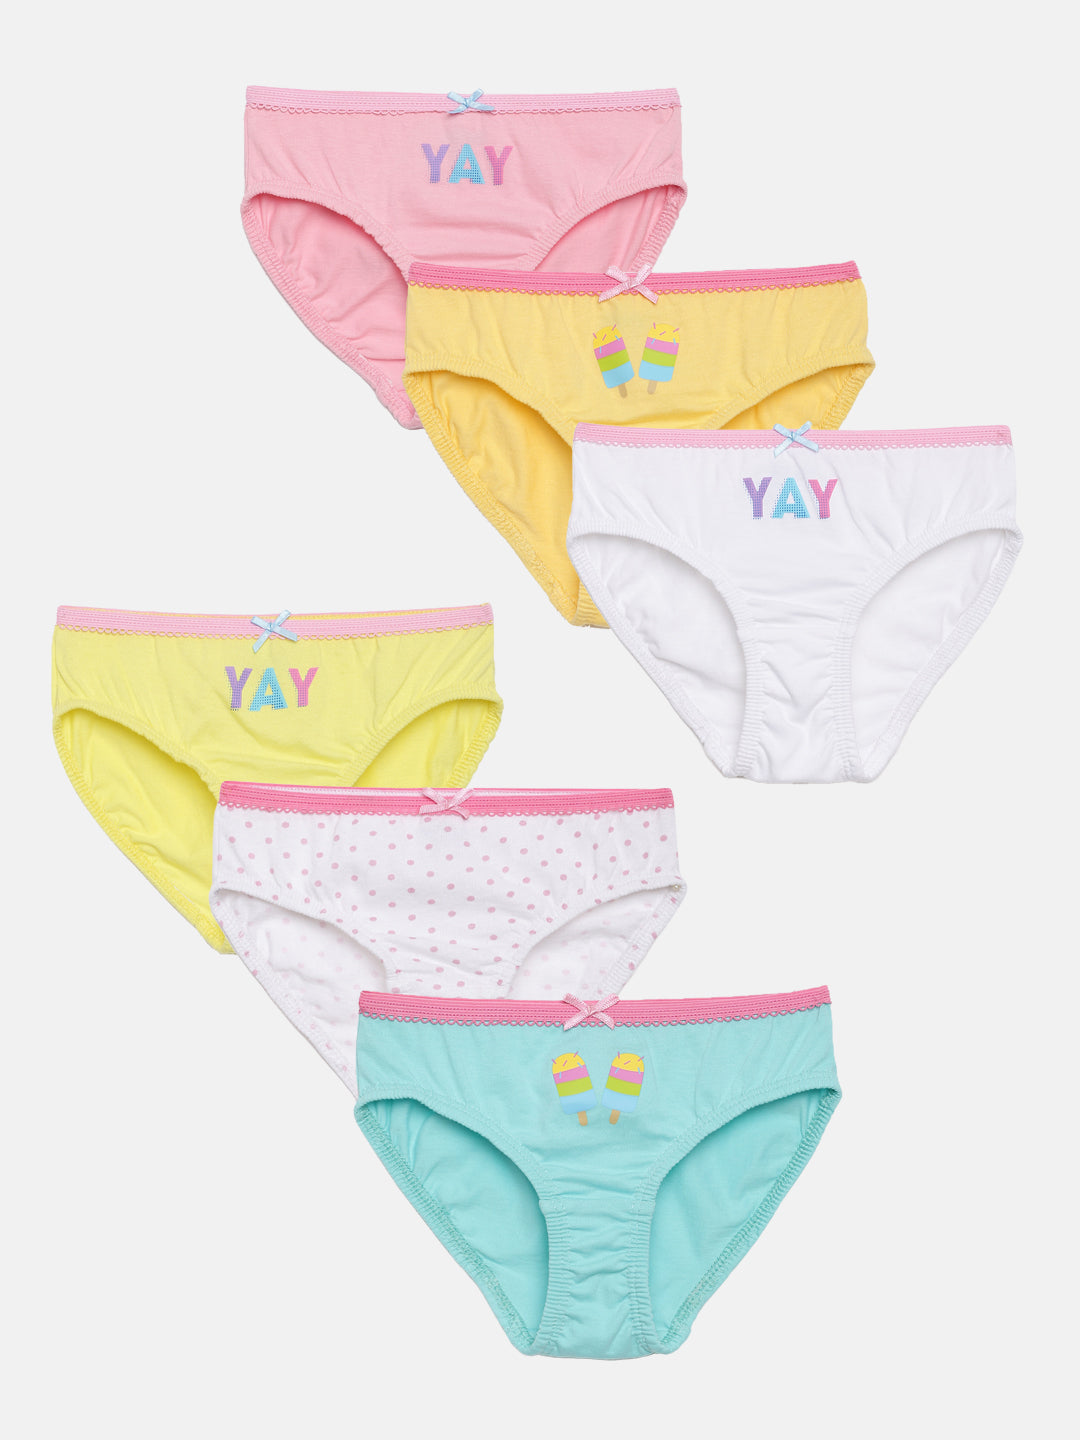 GIRLS BRIEF PACK OF 6